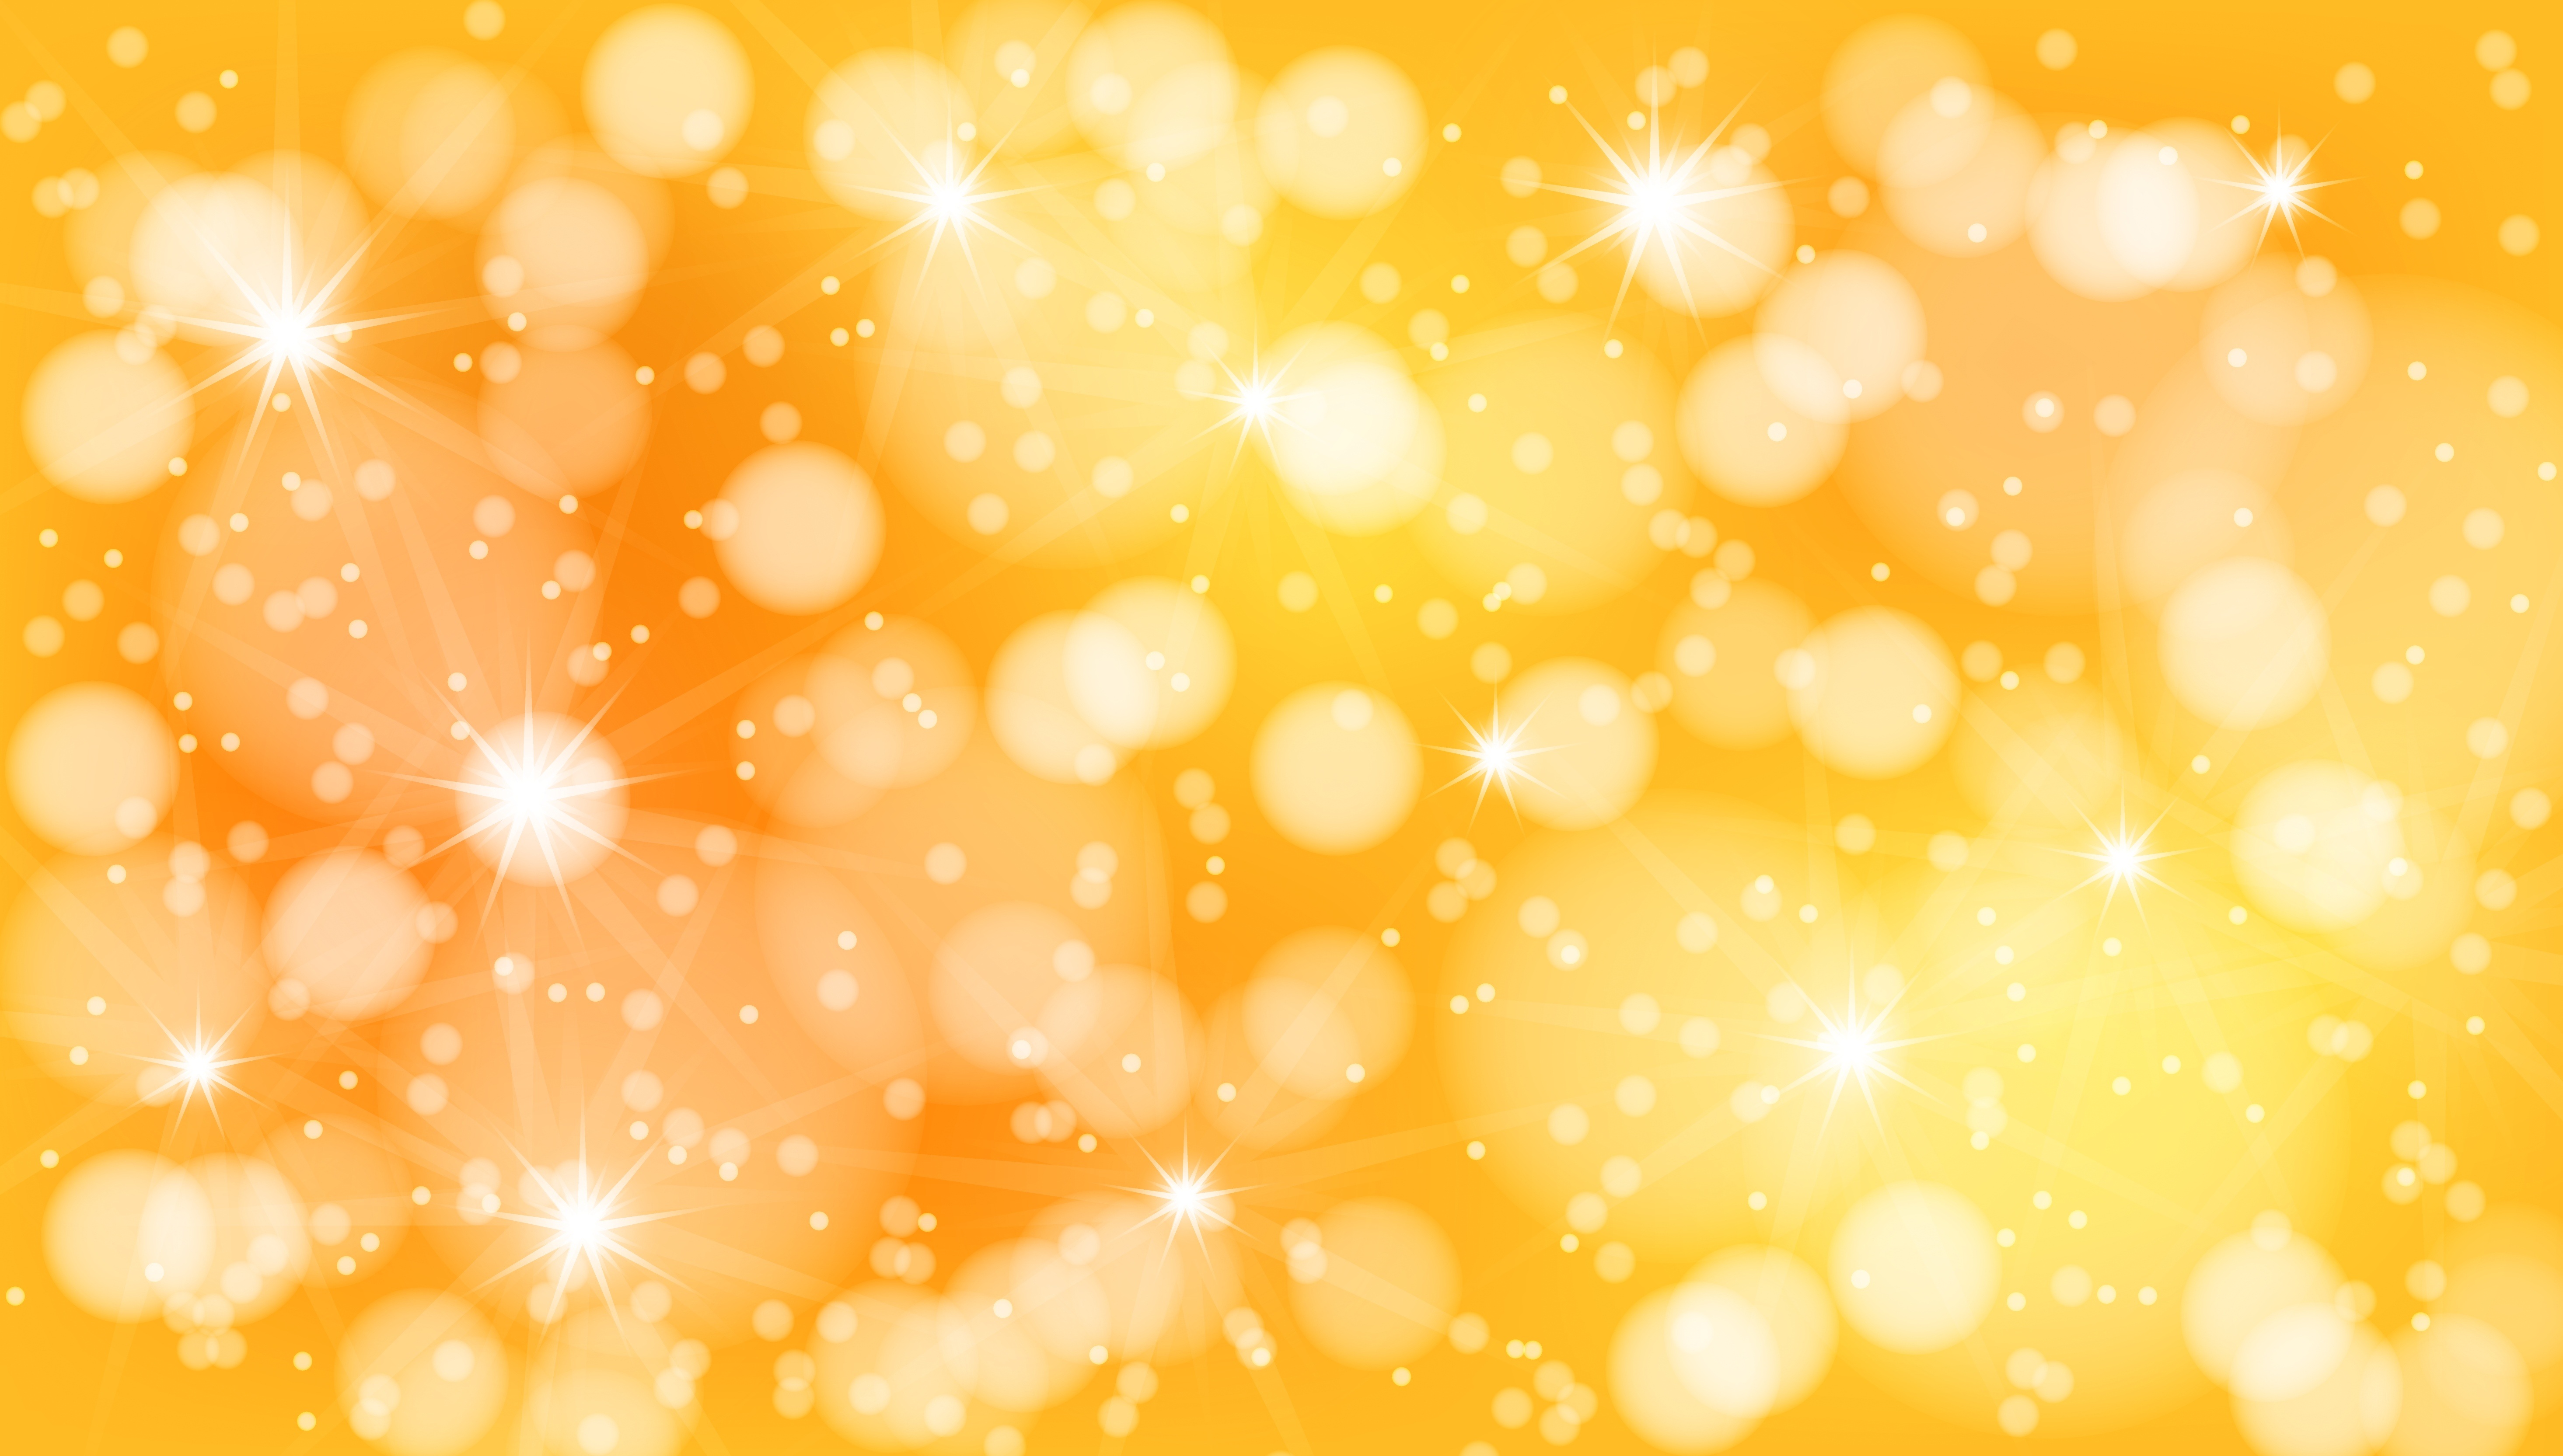 Ligths Yellow 5860x3330